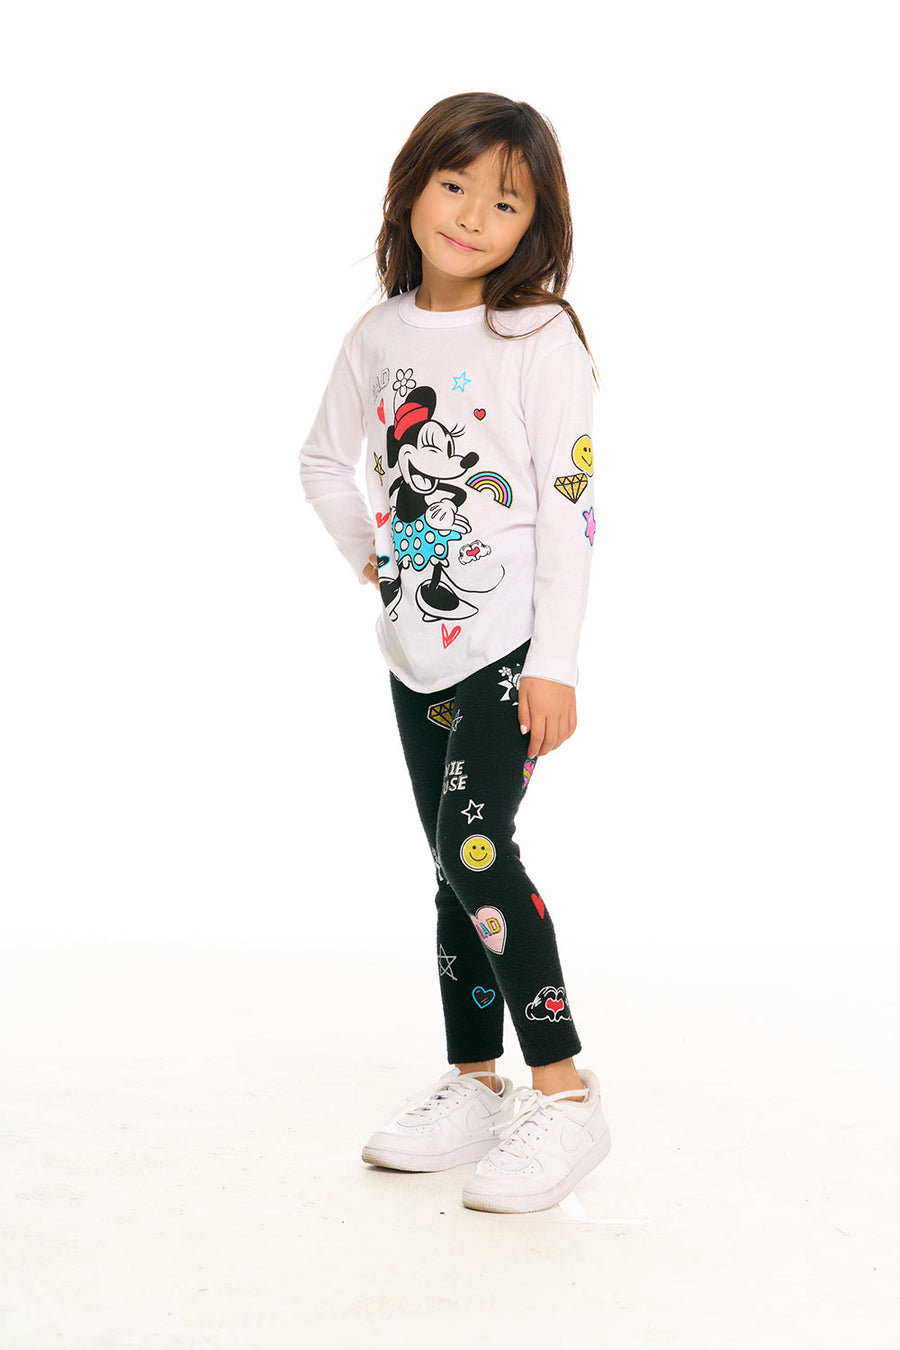 Disney's Minnie Mouse - Hearts & Smiles GIRLS chaserbrand